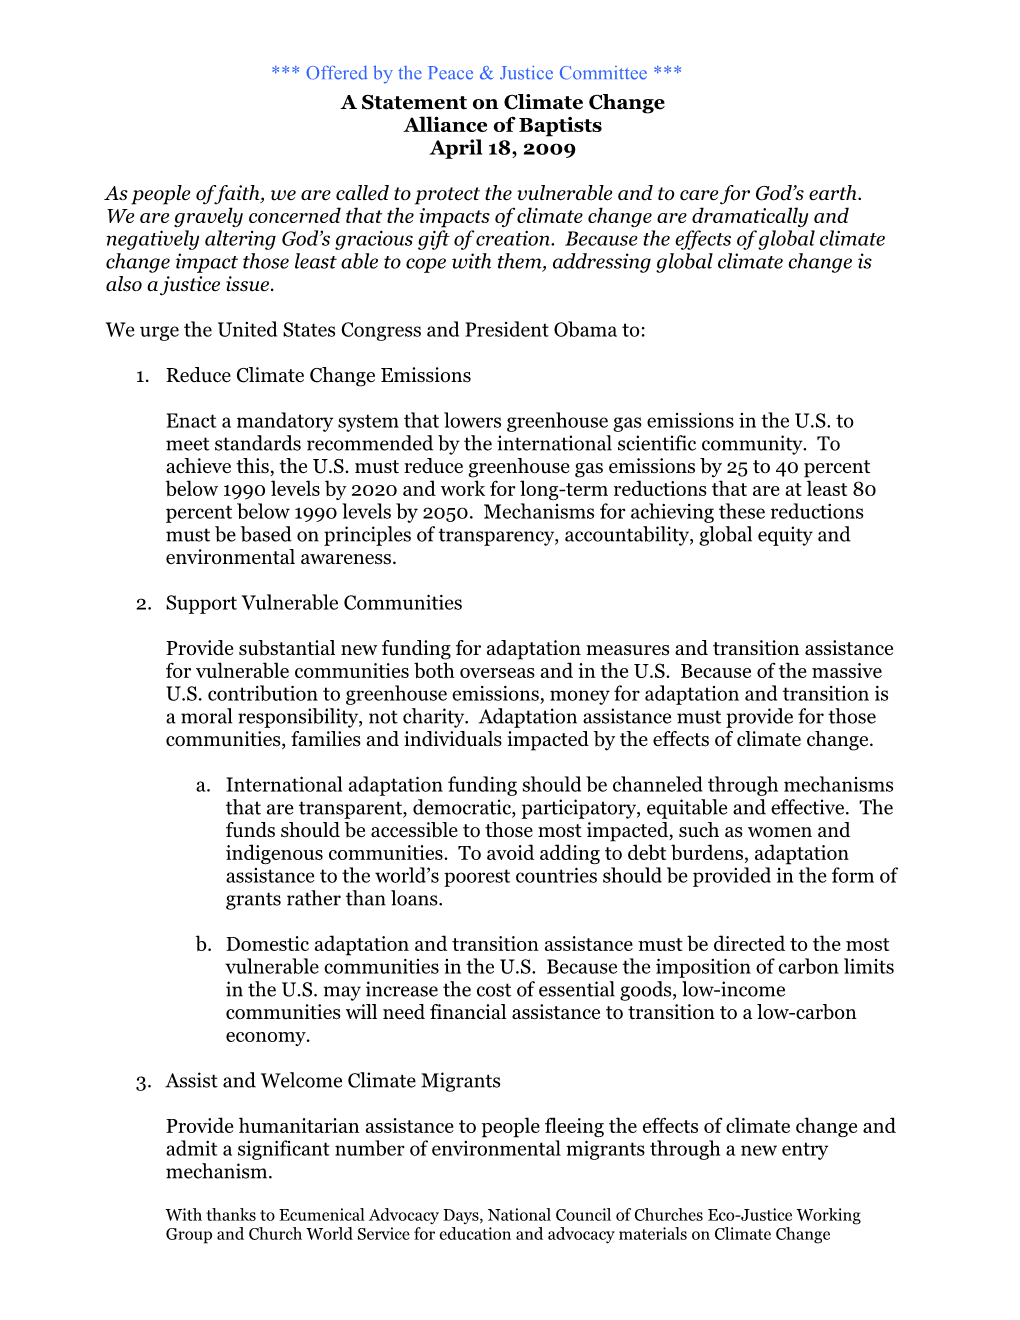 Alliance of Baptists, Convocation 2009, Statement on Climate Change